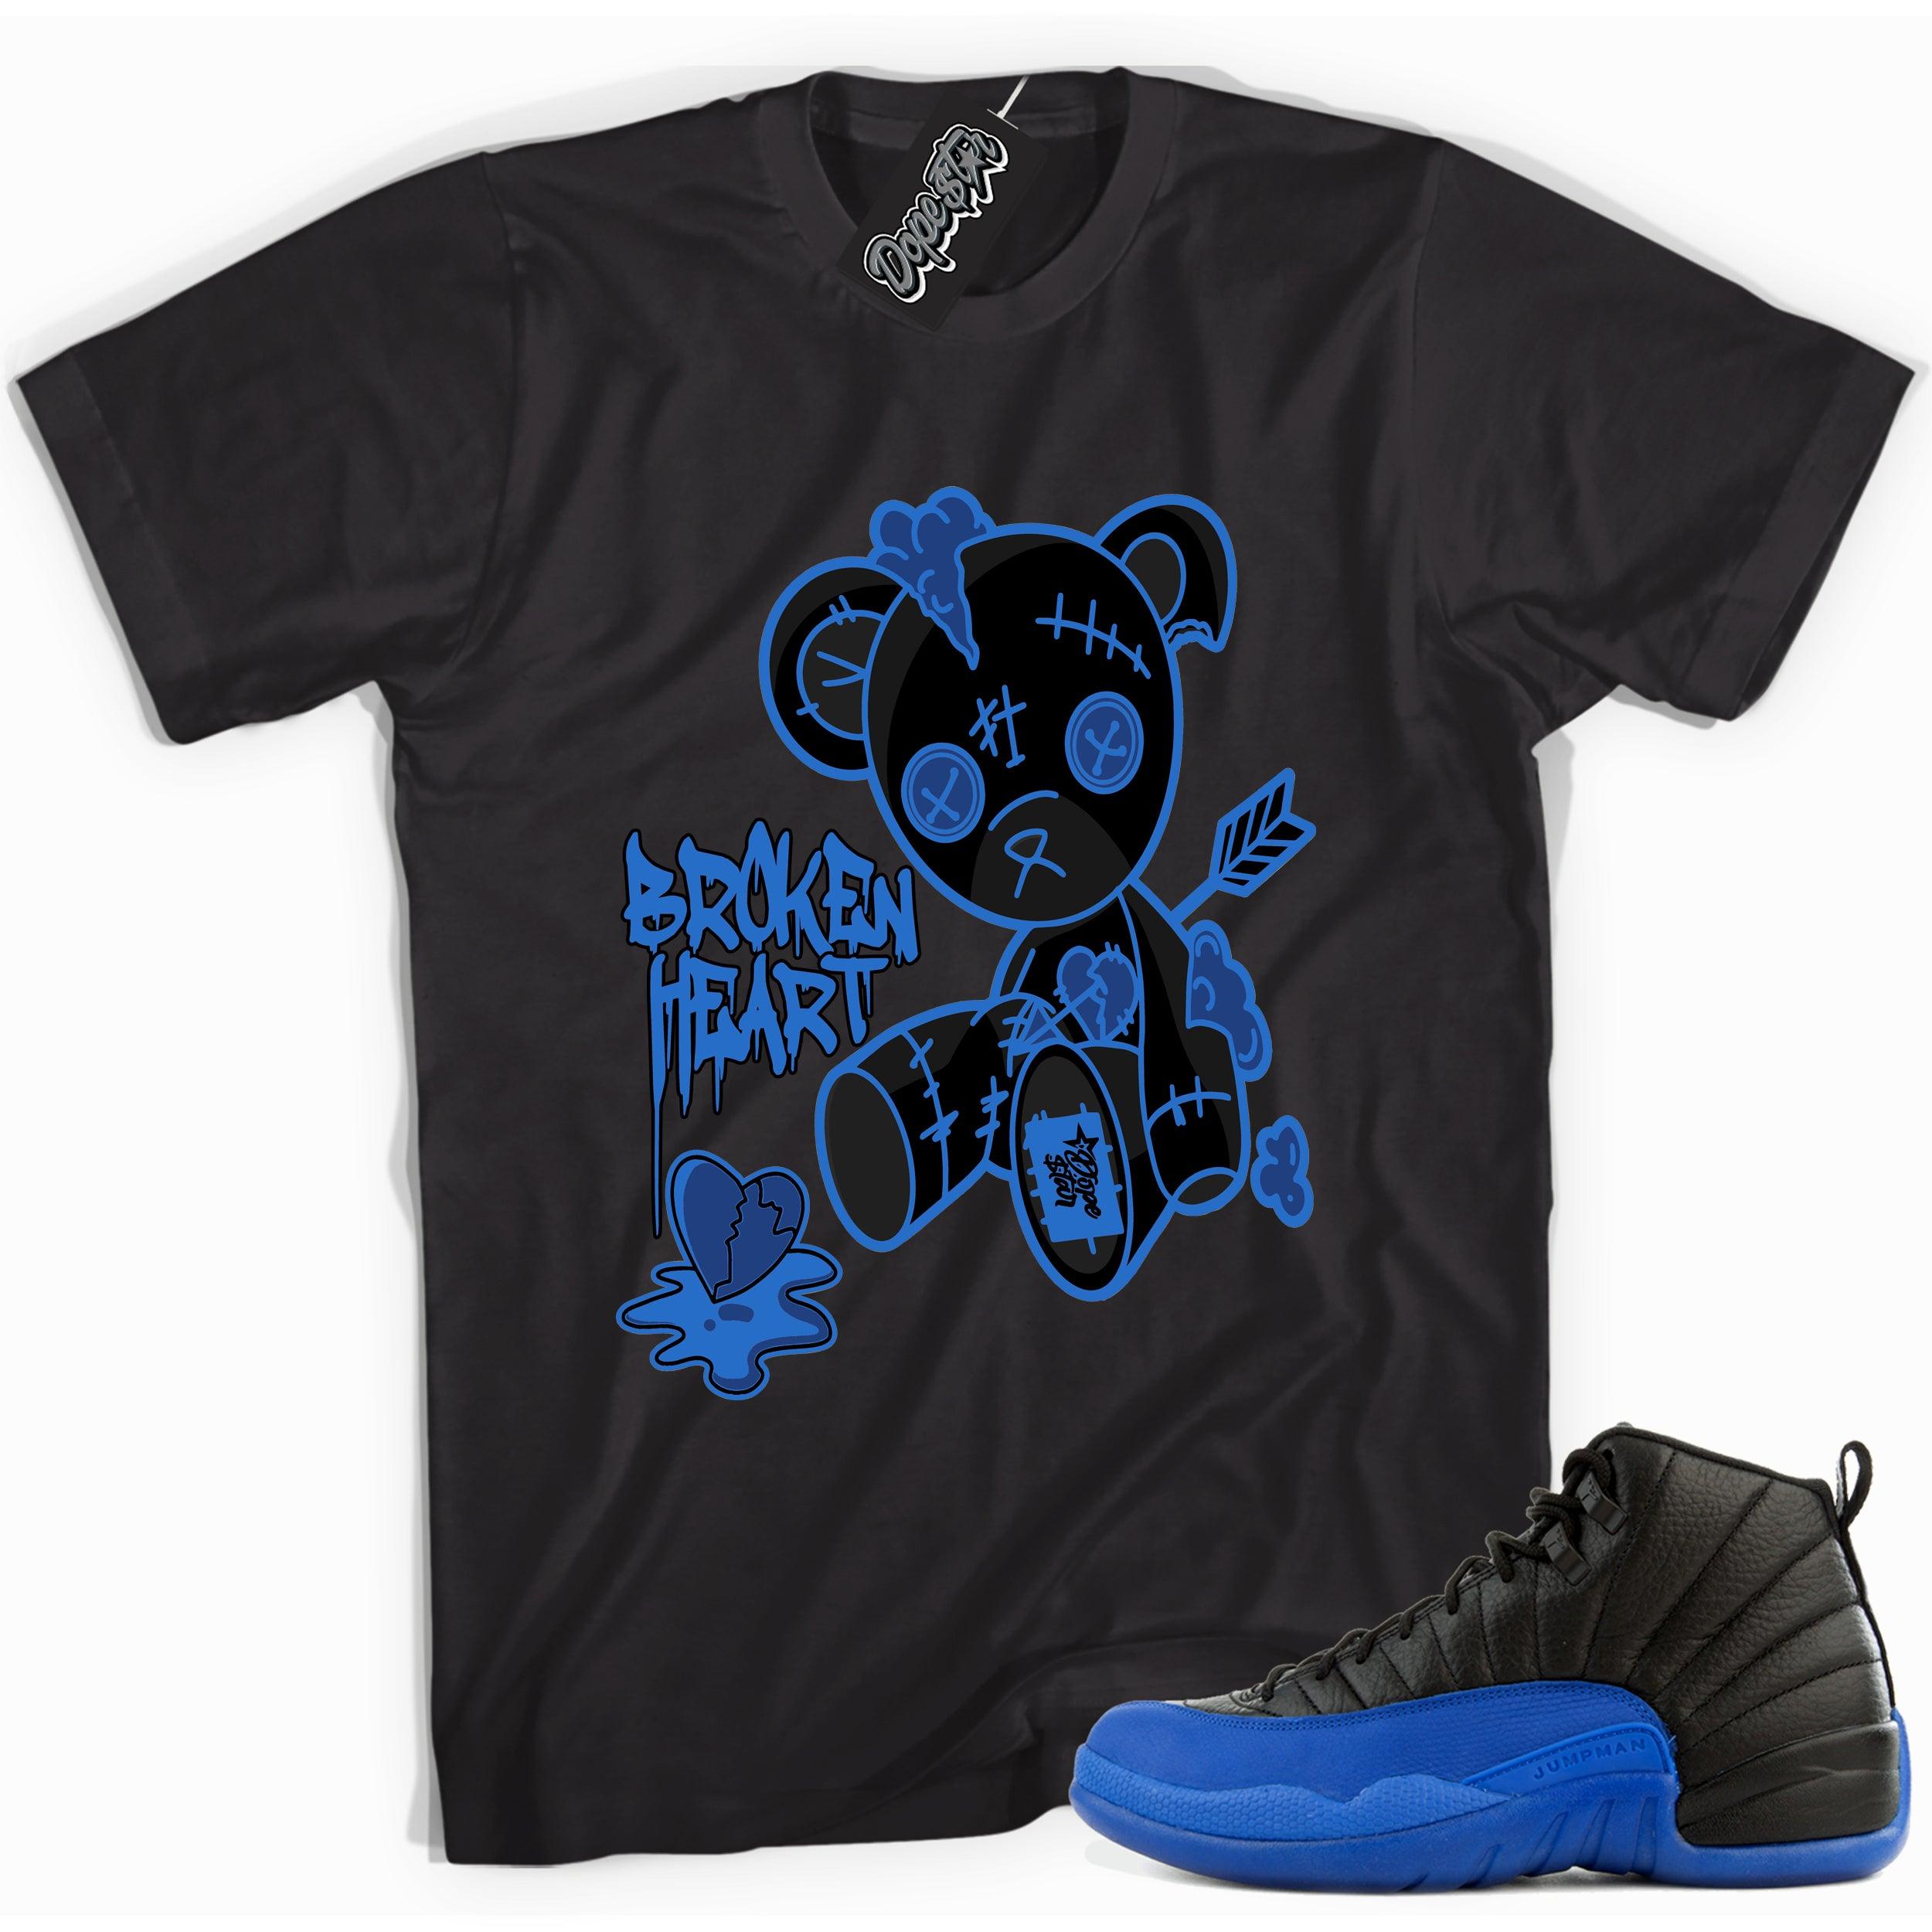 Cool black graphic tee with 'broken heart bear' print, that perfectly matches  Air Jordan 12 Retro Black Game Royal sneakers.